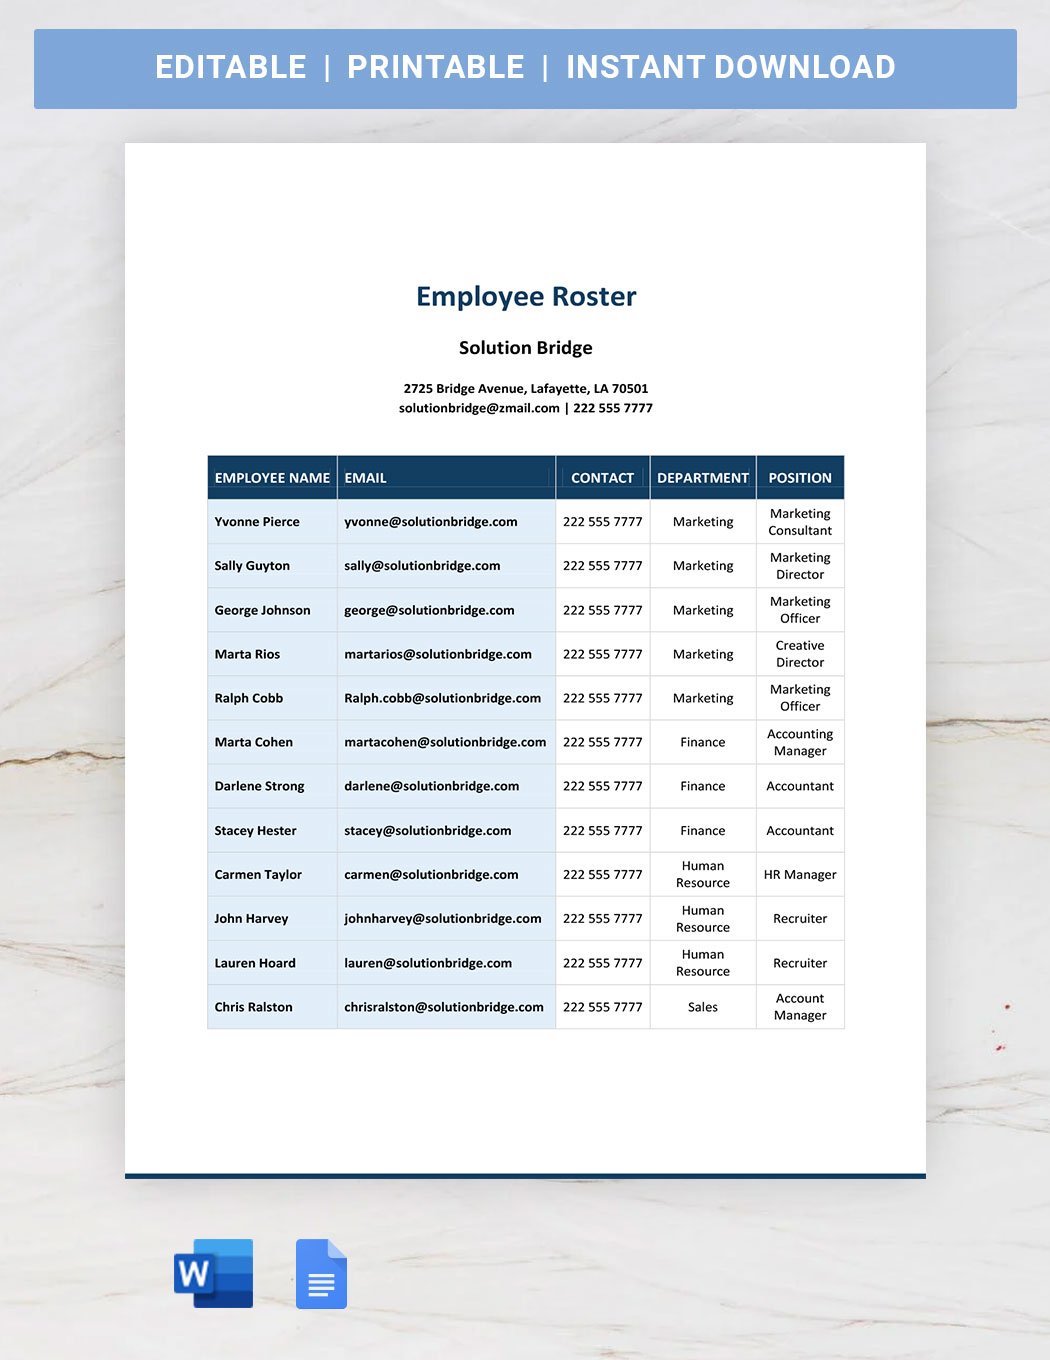 Employee Roster Format